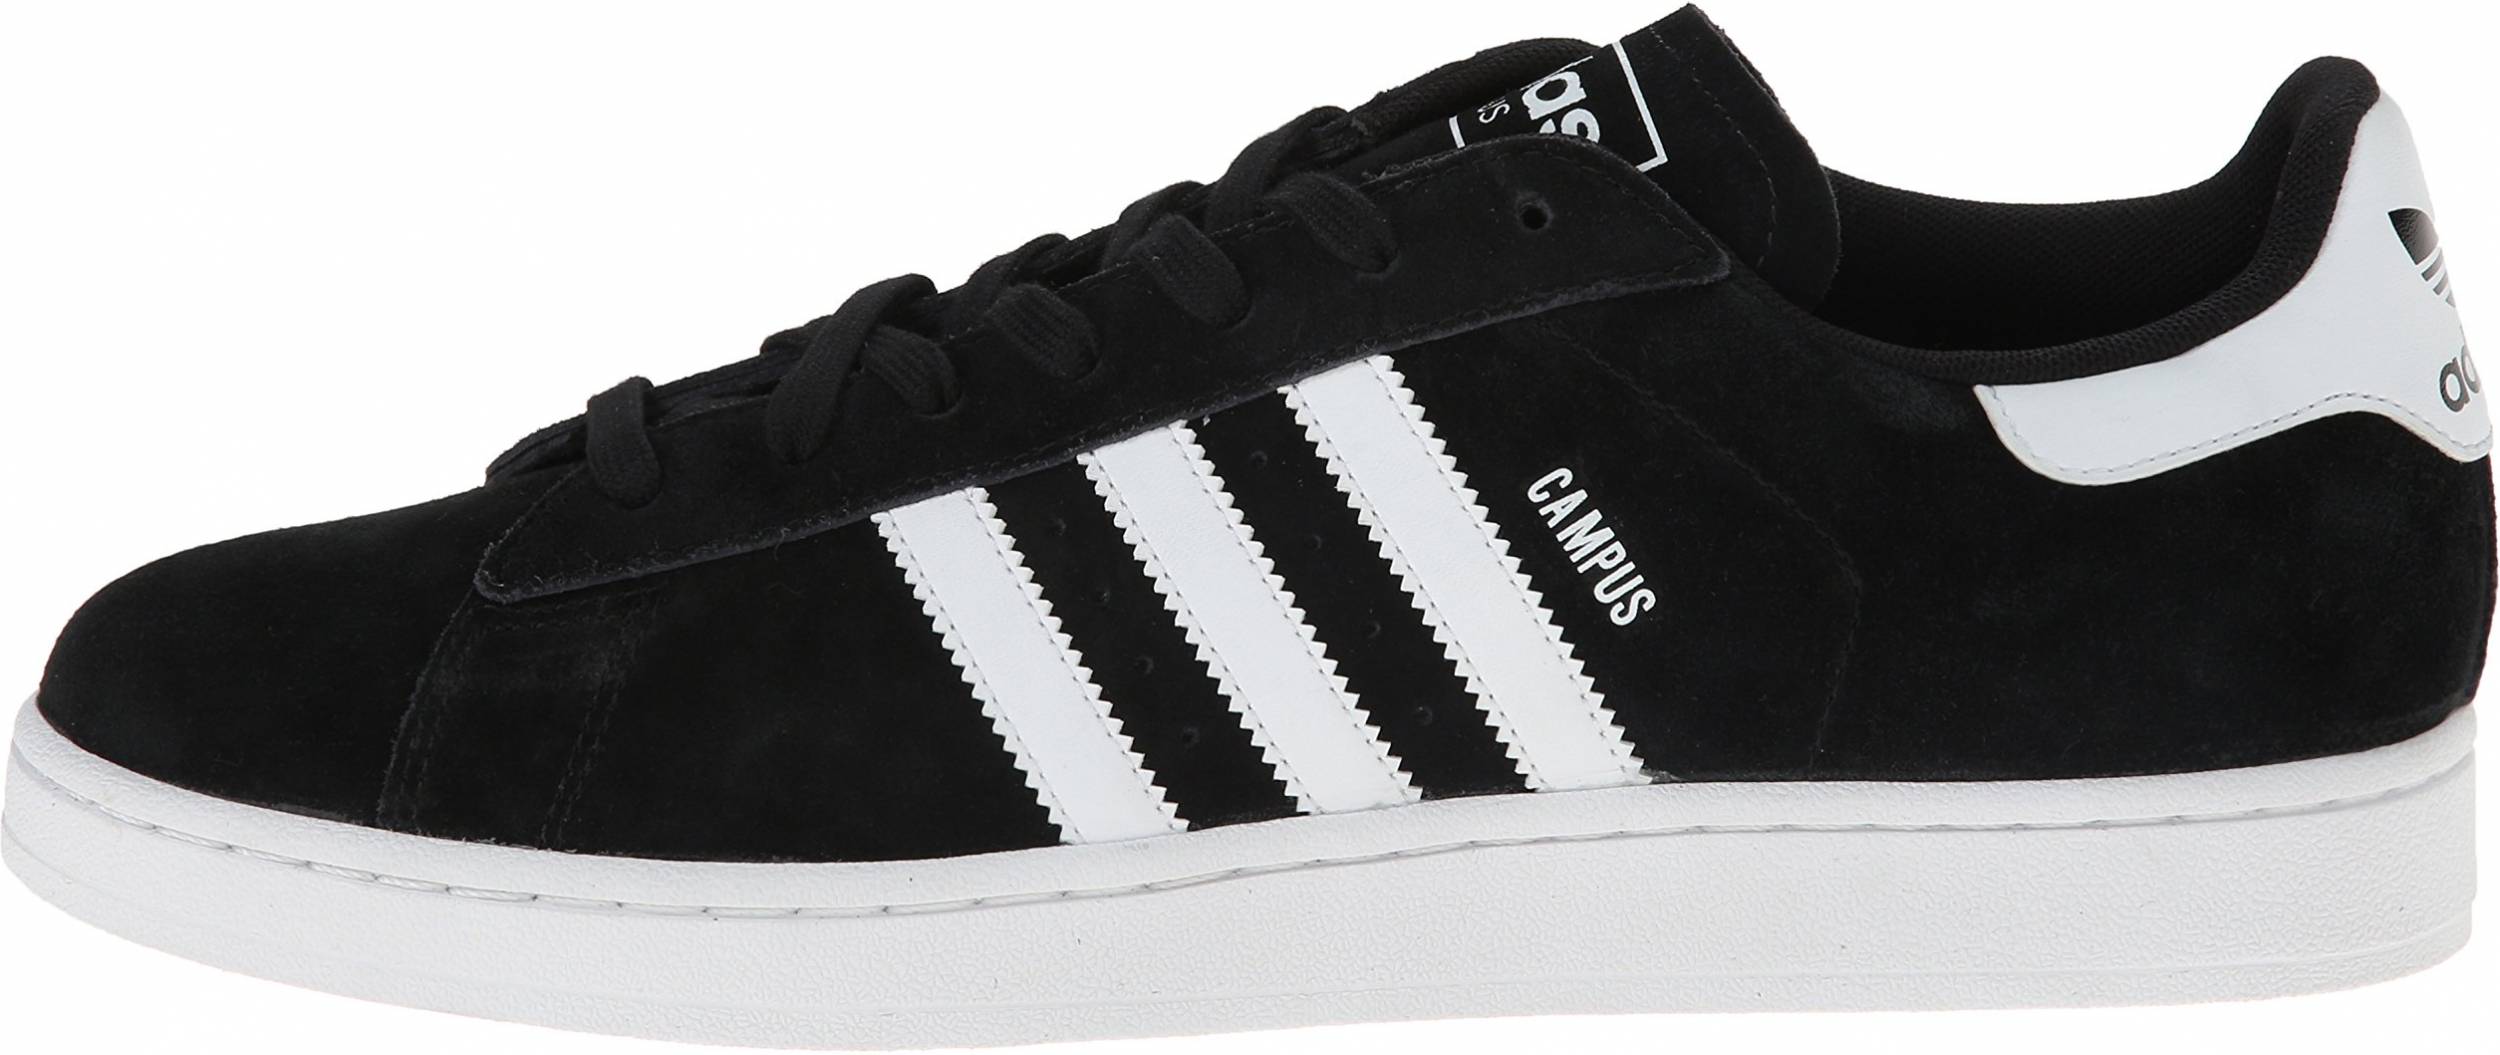 Save 42% on Adidas Campus Sneakers (8 